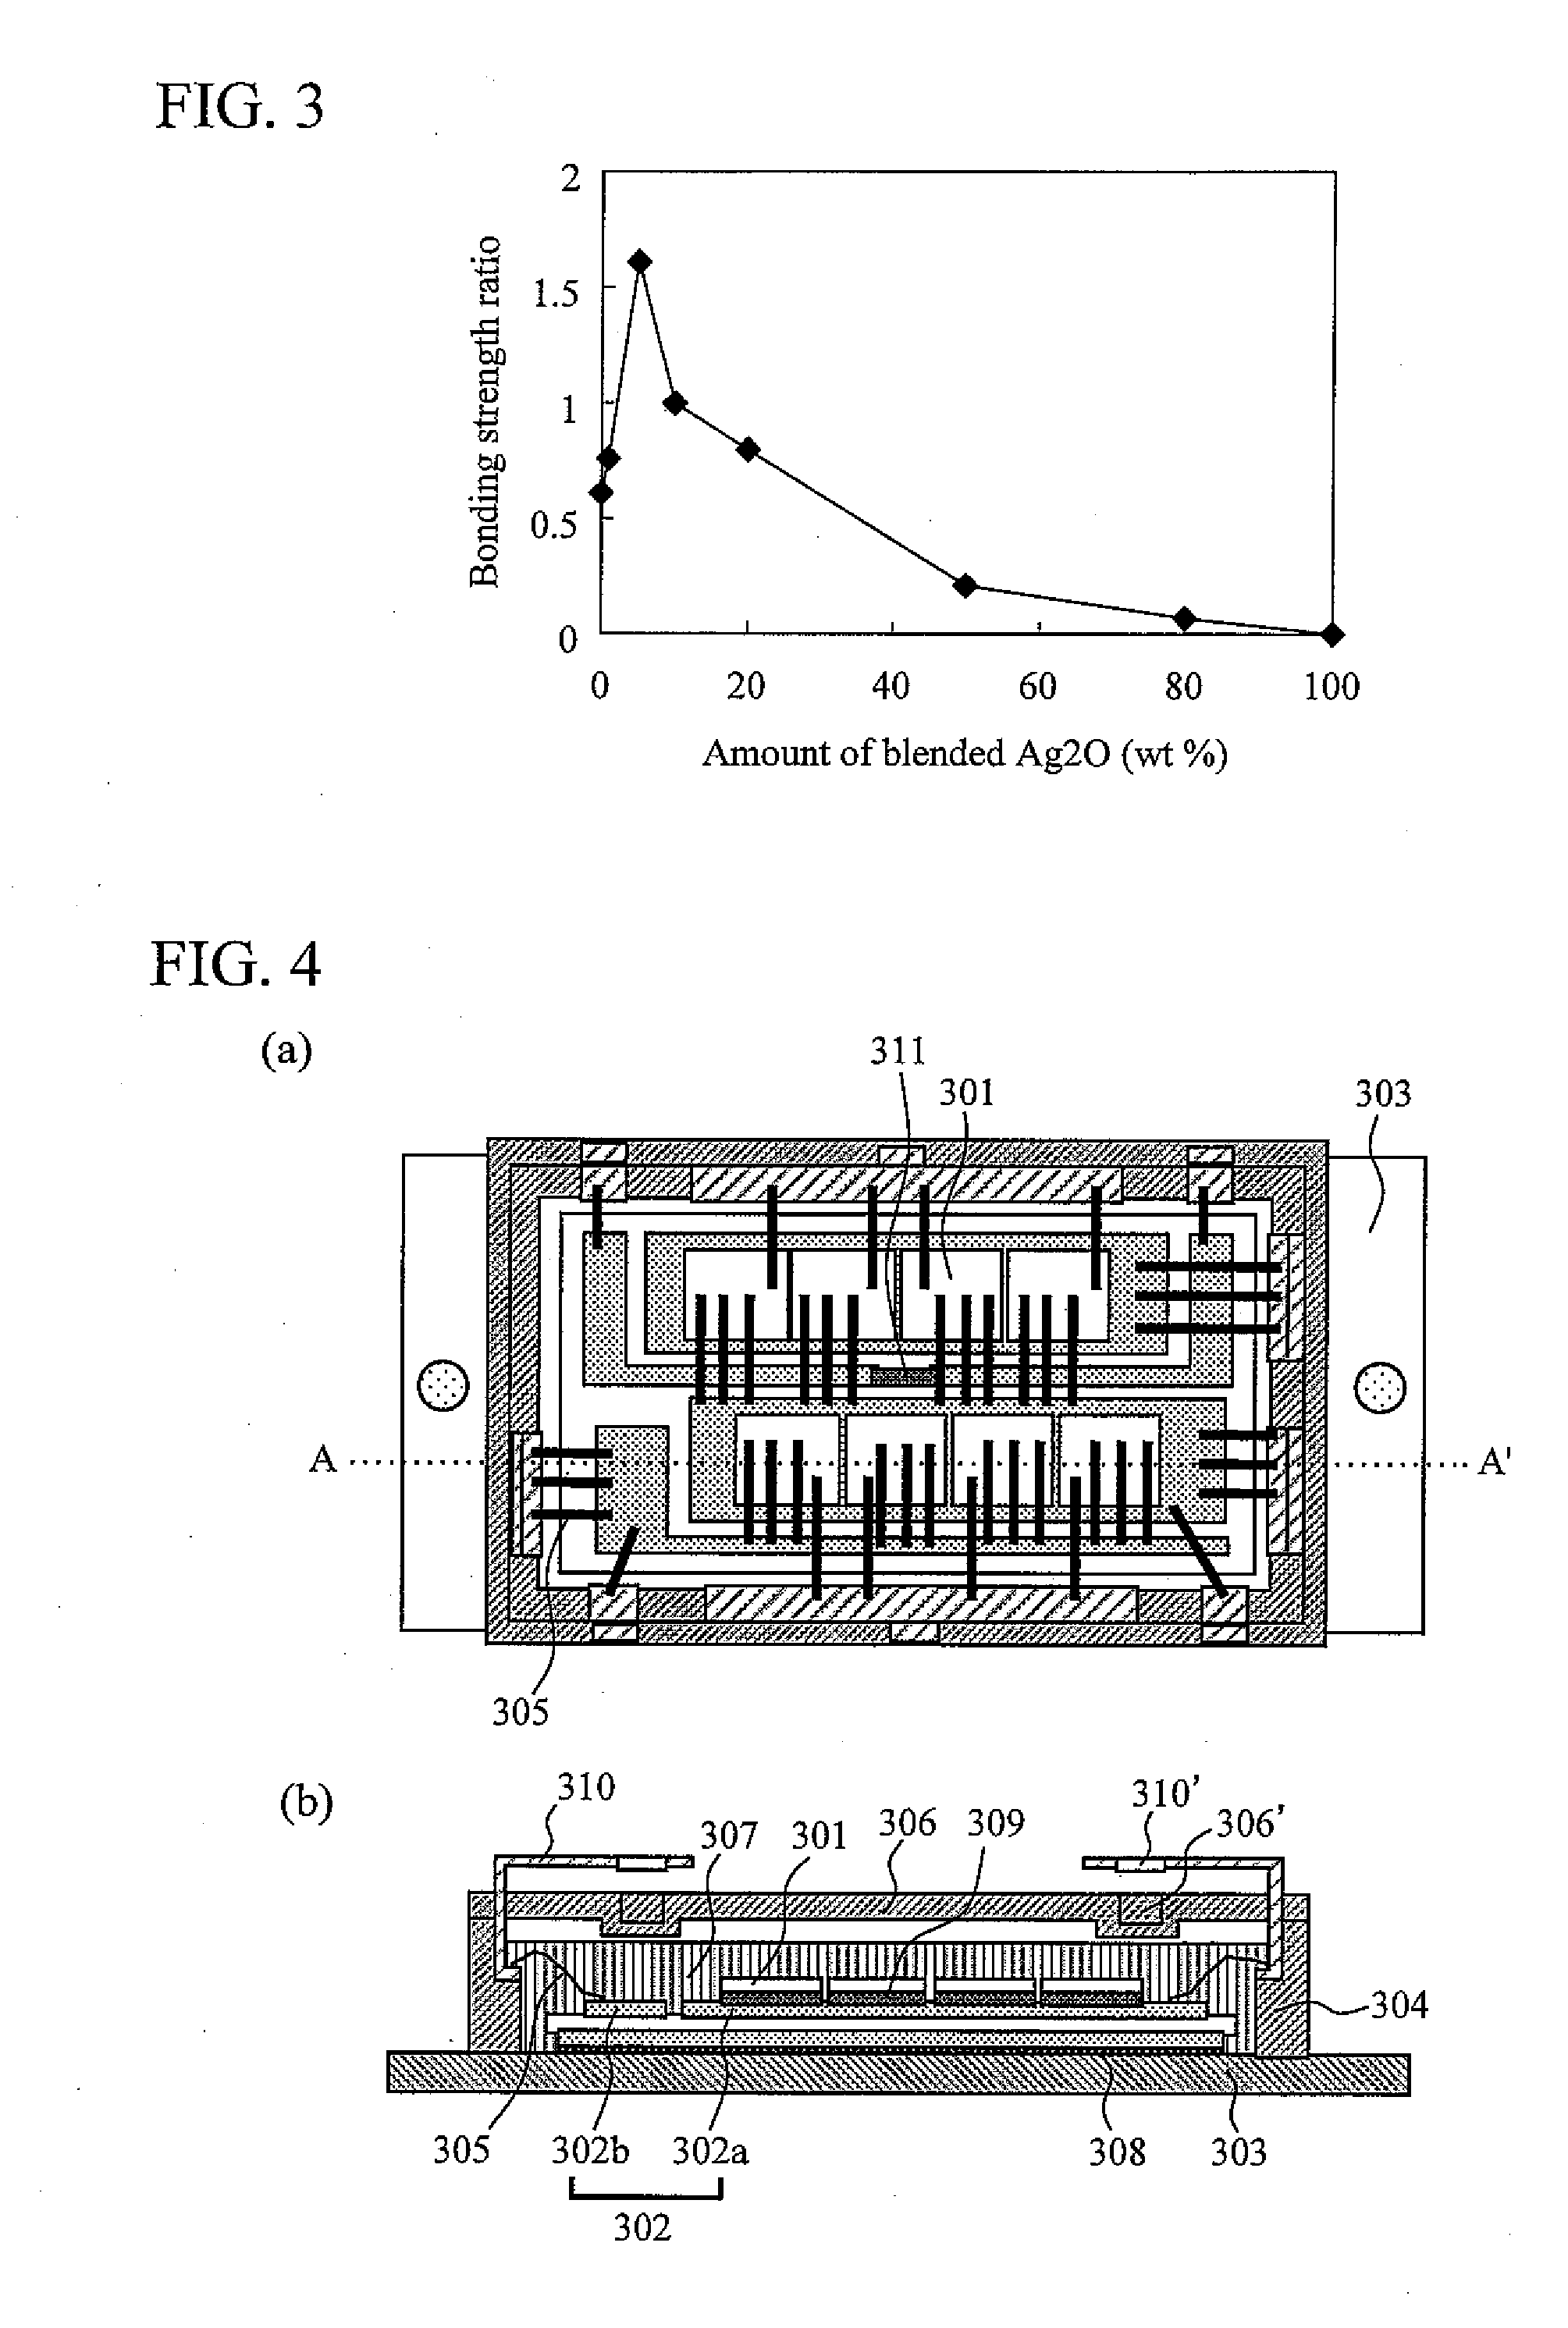 Electrically conductive bonding material, method of bonding with the same, and semiconductor device bonded with the same